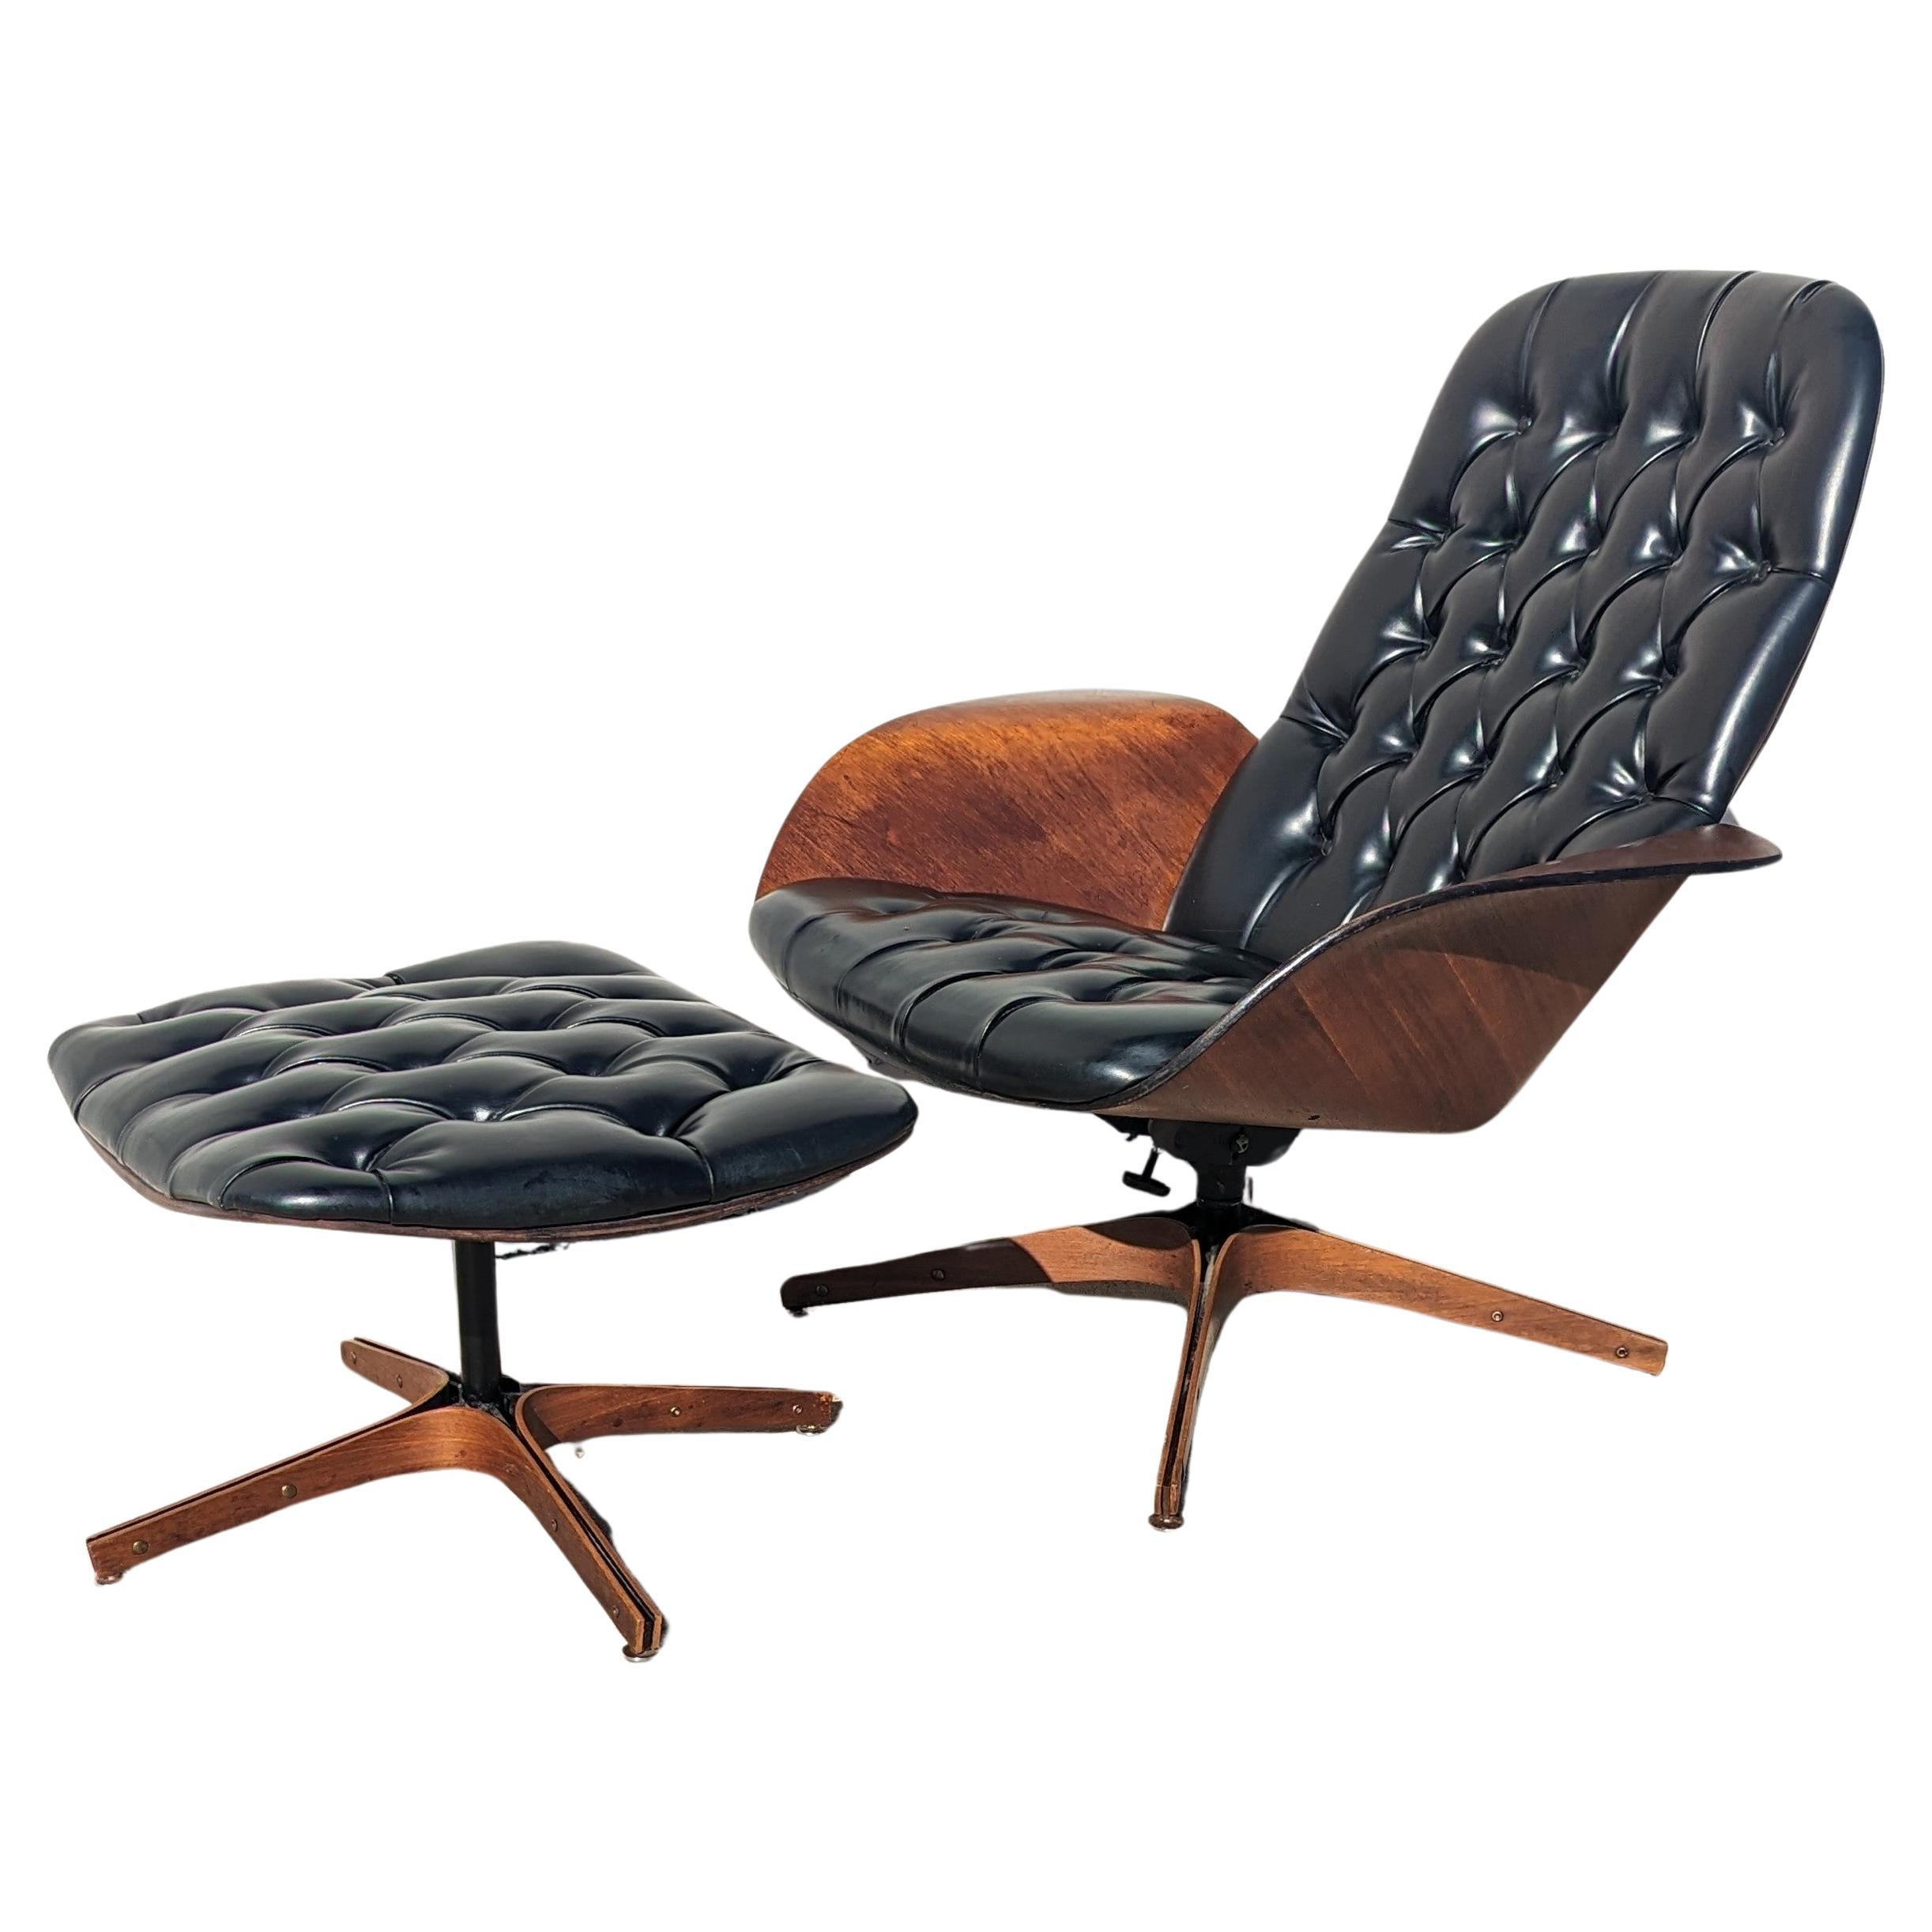 Plycraft Mulhauser Mr Chair and Ottoman mi-siècle moderne 